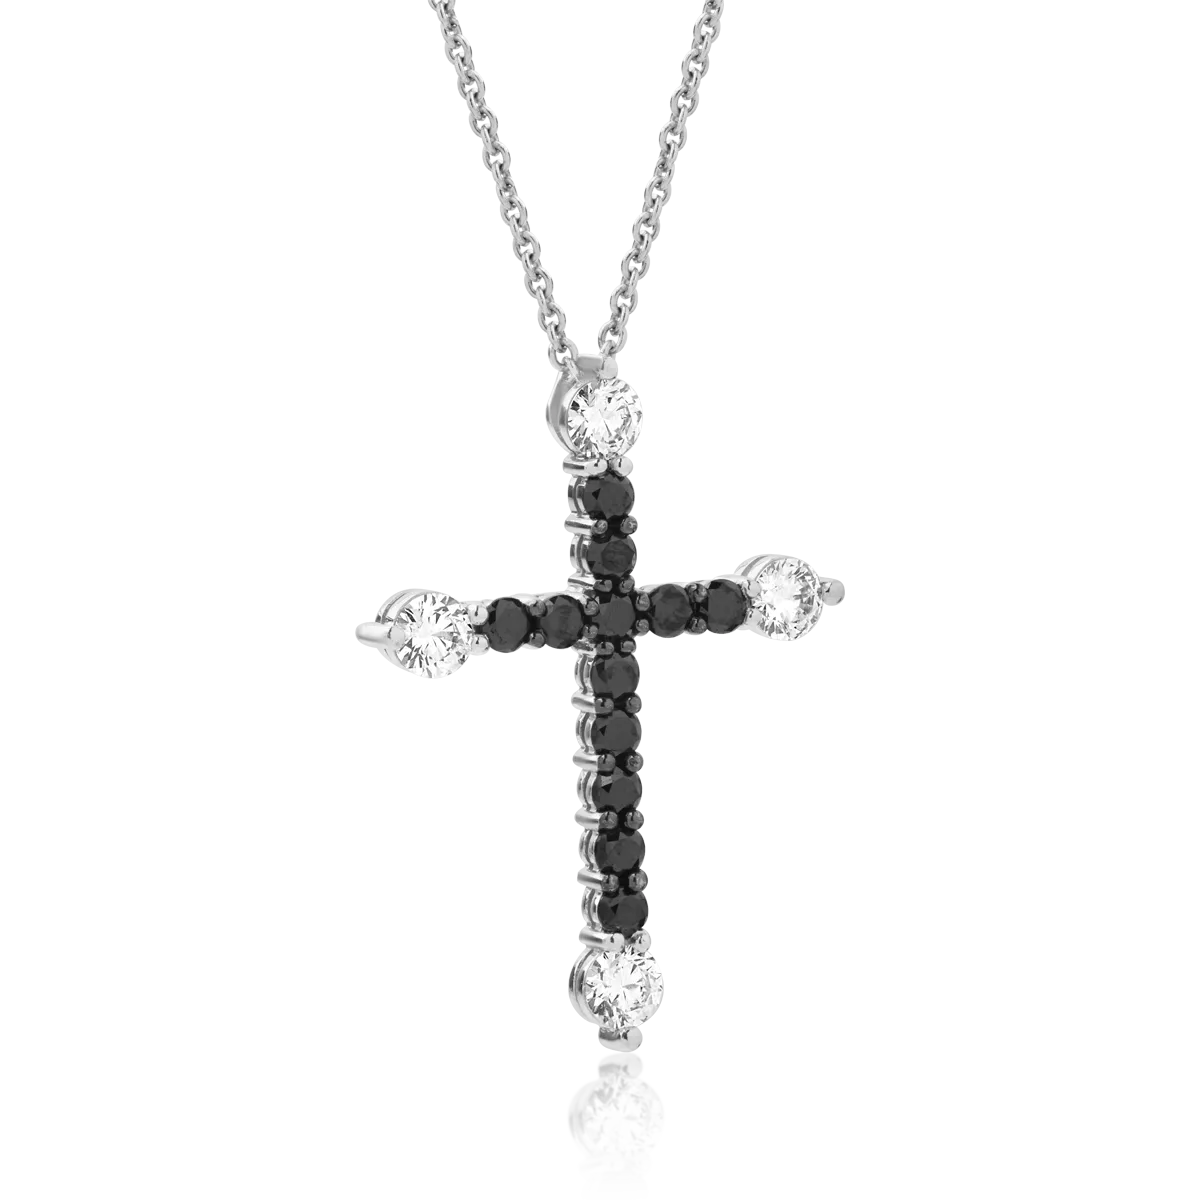 18K white gold cross pendant necklace with 0.5ct clear diamonds and 0.53ct black diamonds